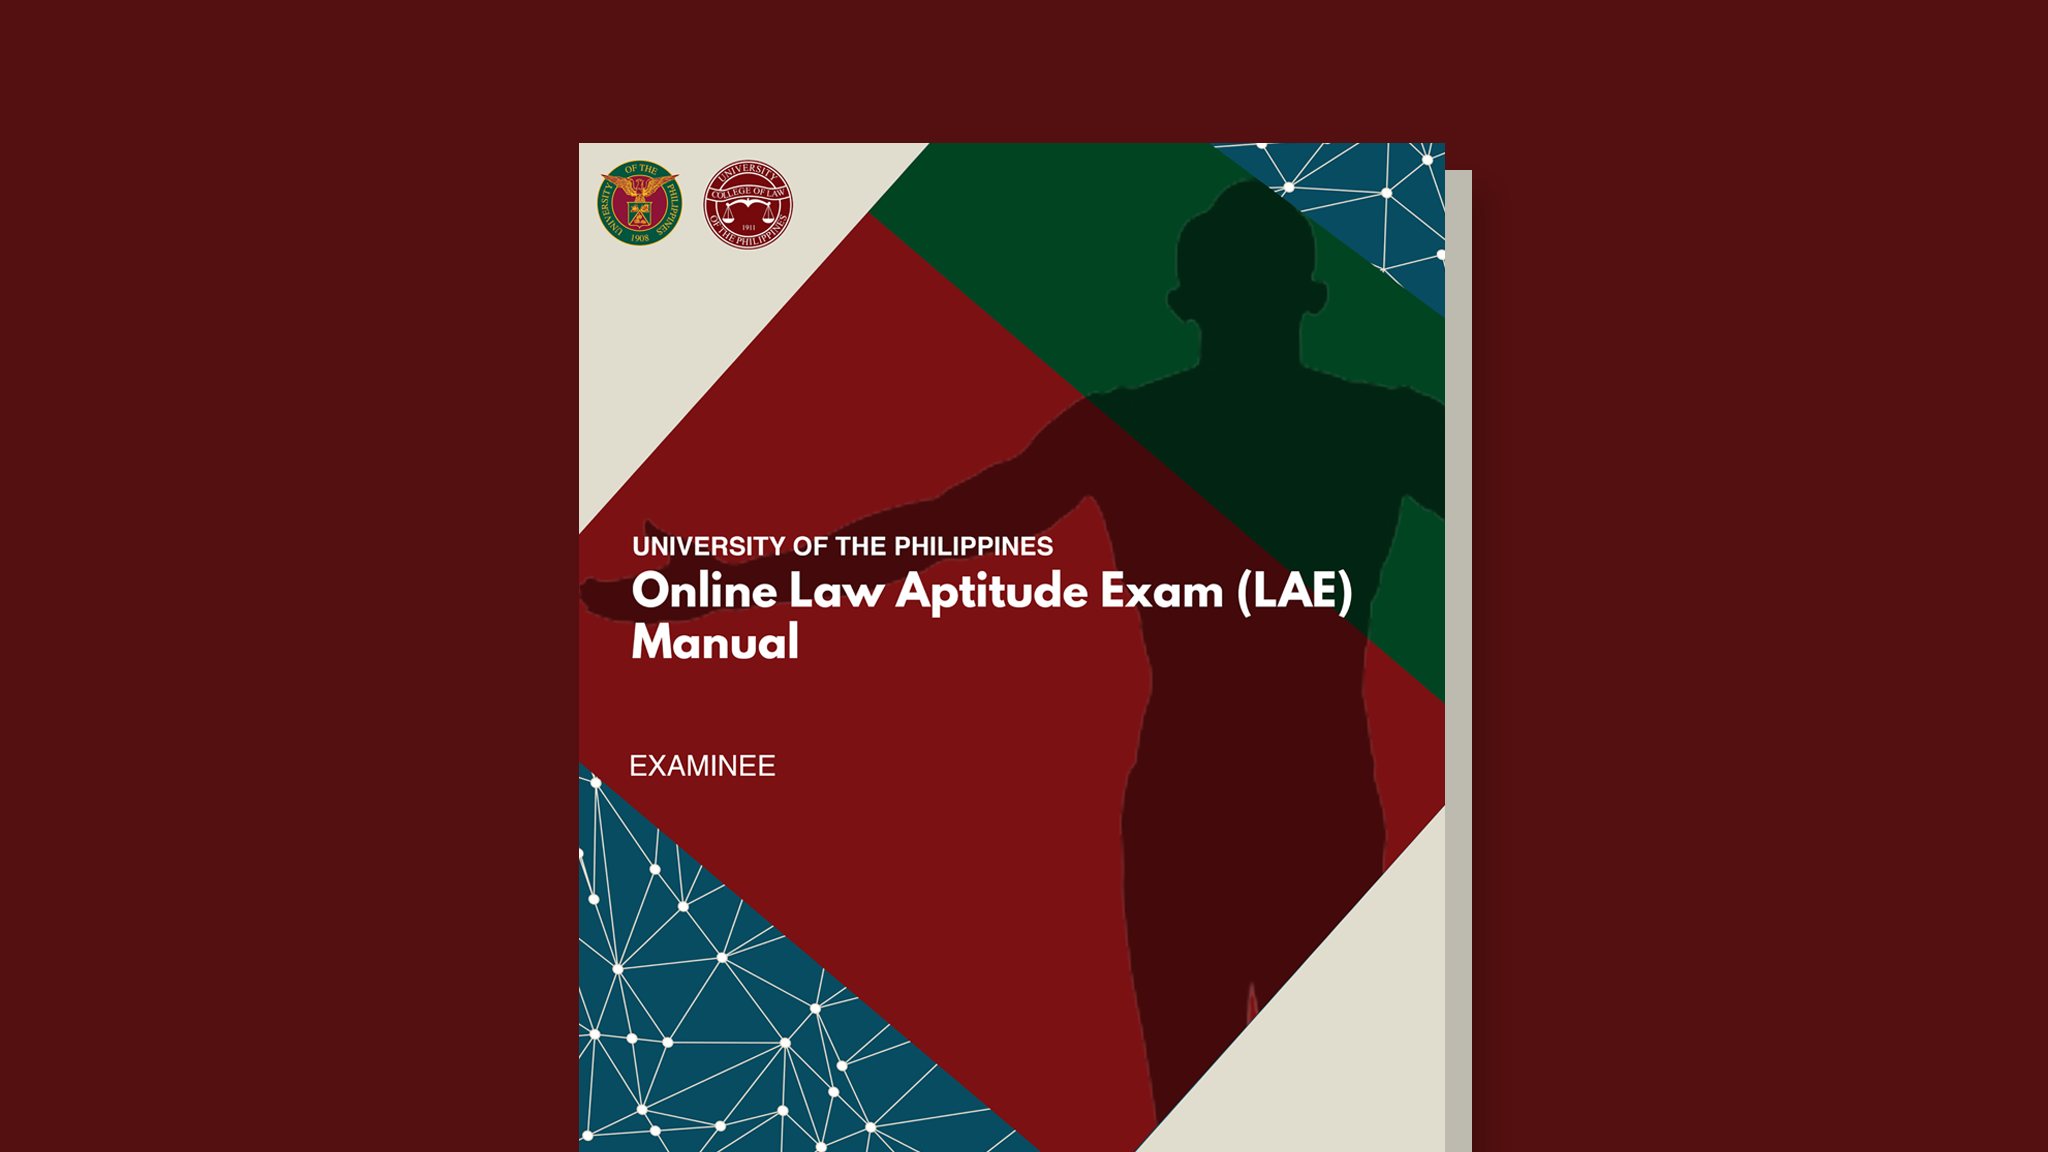 Guidelines for 2021 Law Aptitude Examination